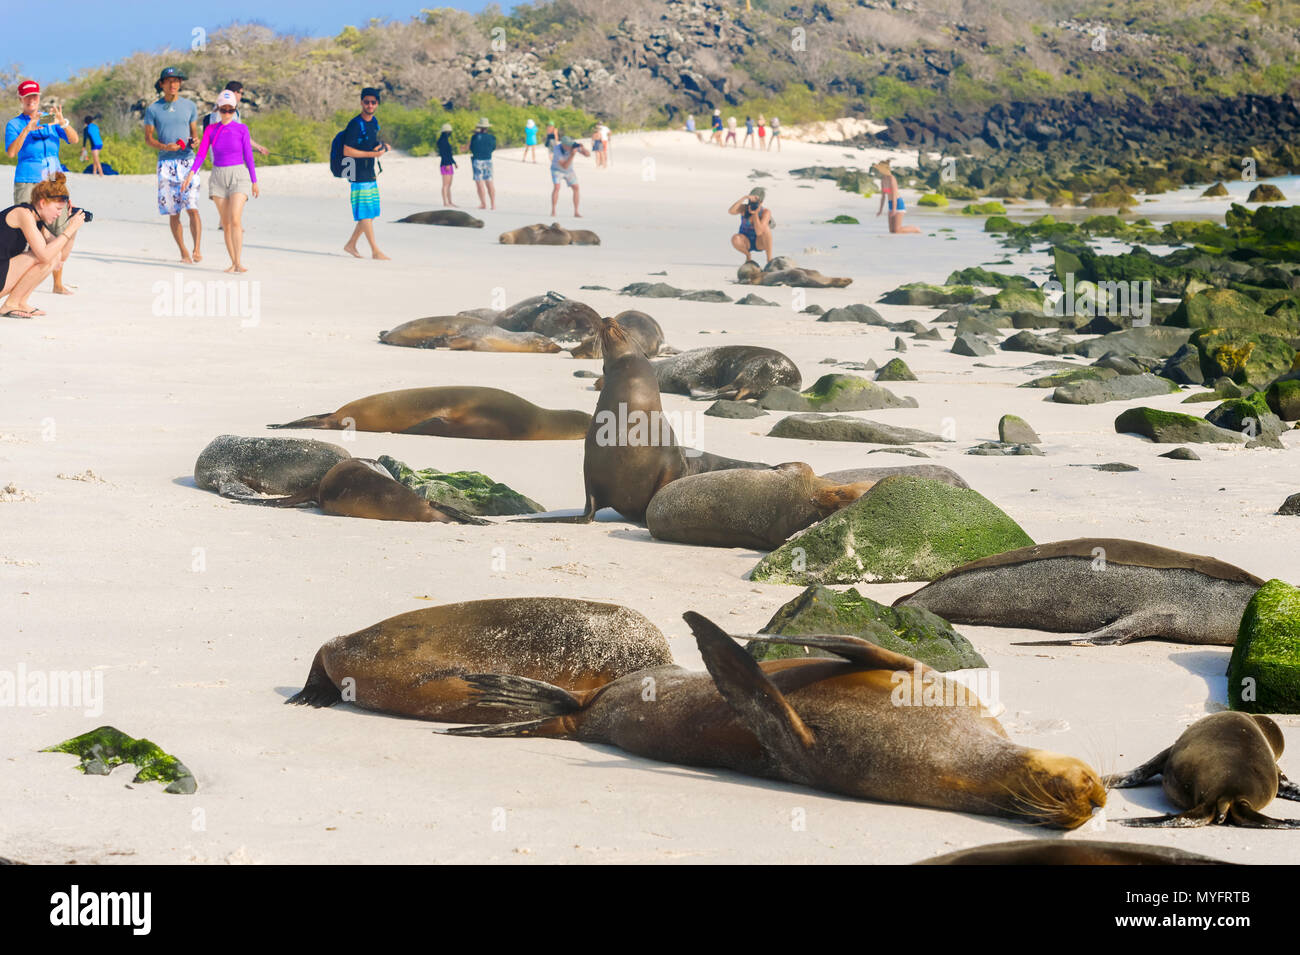 Espanola island, Galapagos, Ecuador - April 8, 2016: Tourists walking on the beach at Espanola island are passing by the colony of sea lions. Stock Photo